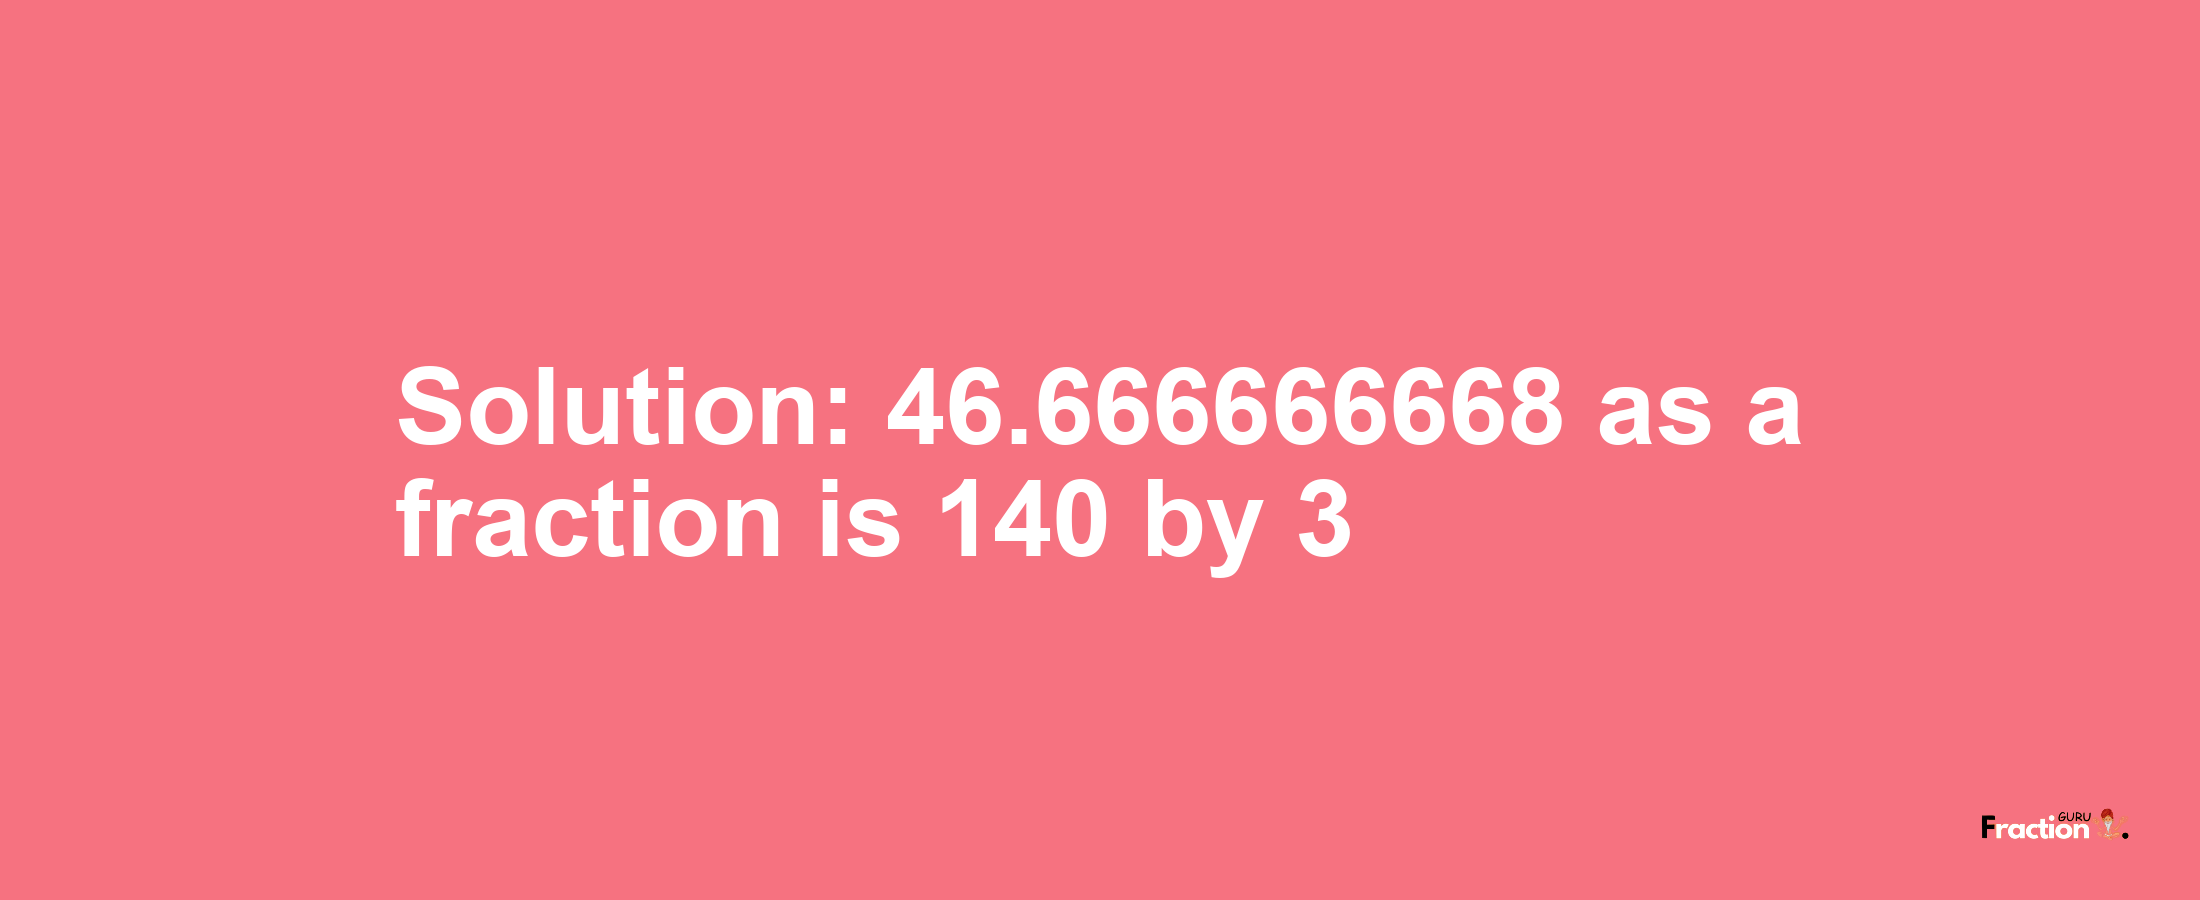 Solution:46.666666668 as a fraction is 140/3